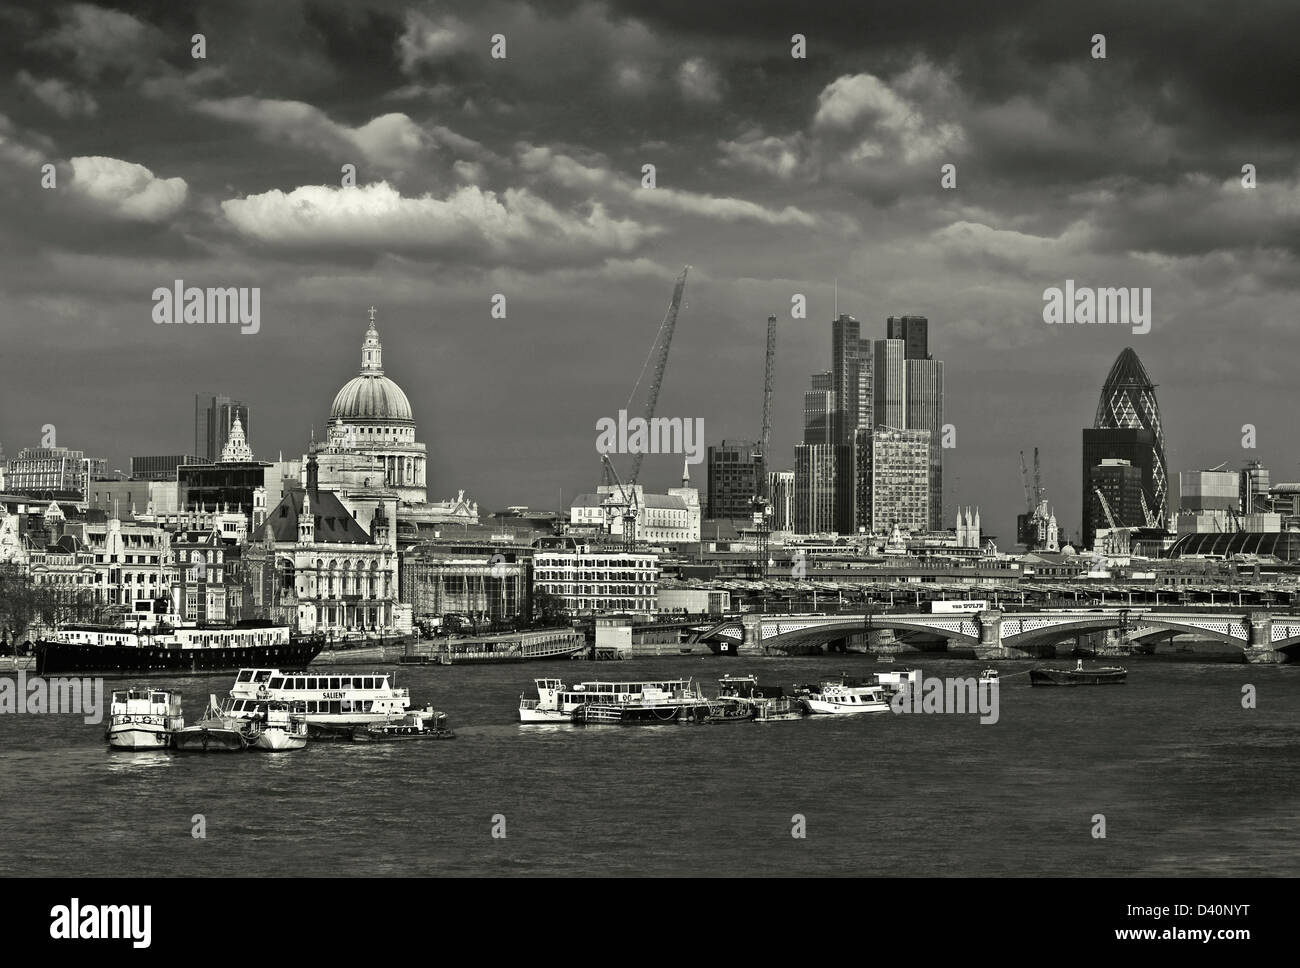 View over river Thames to St Pauls Cathedral Blackfriars Bridge and city skyline Stock Photo